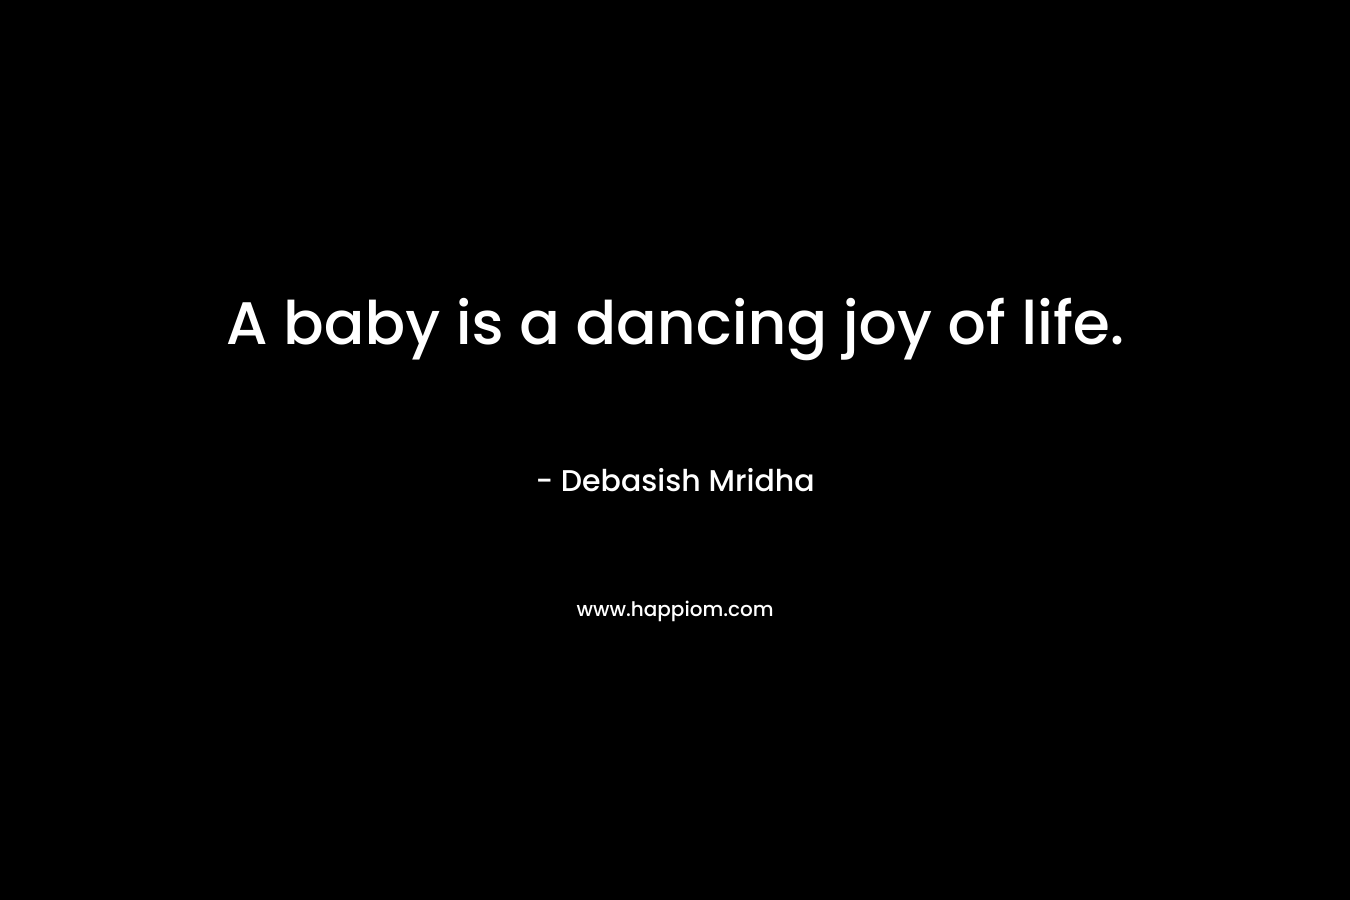 A baby is a dancing joy of life.